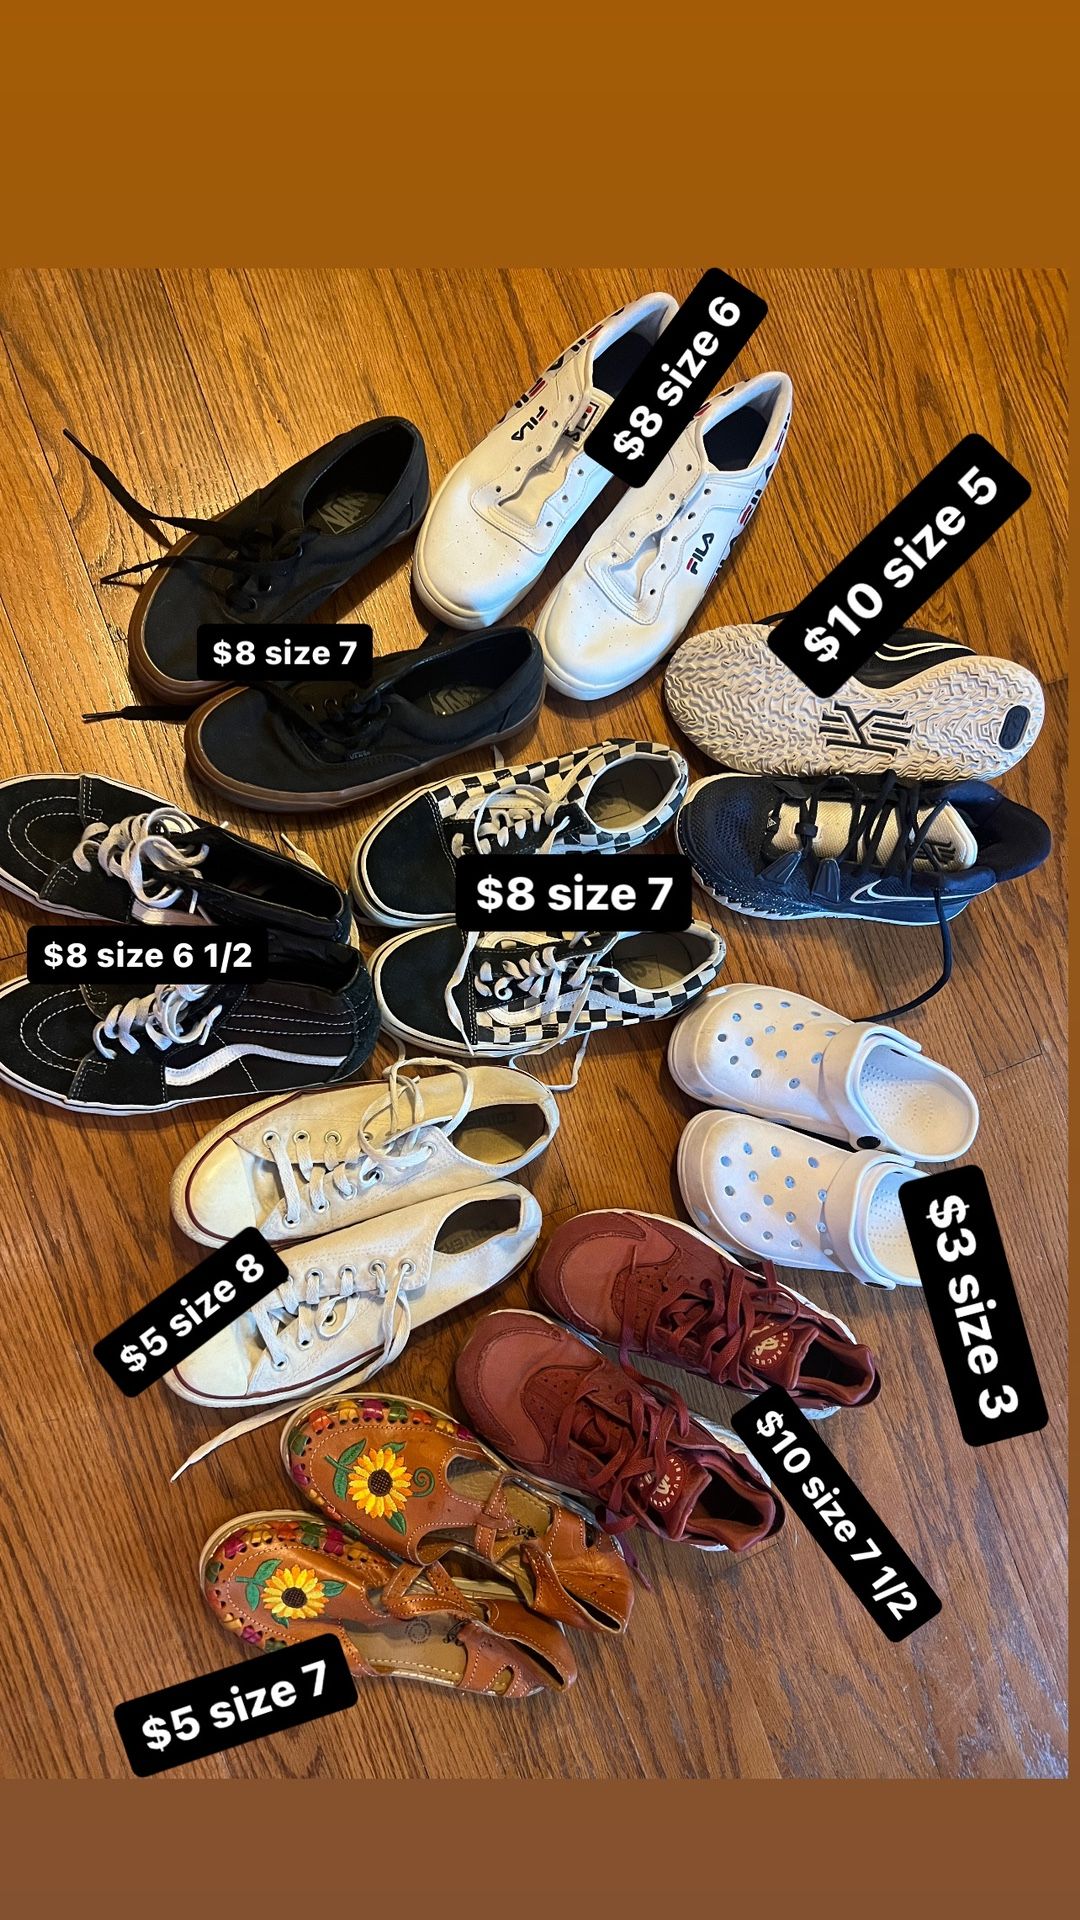 Shoes Sizes And Prices Posted